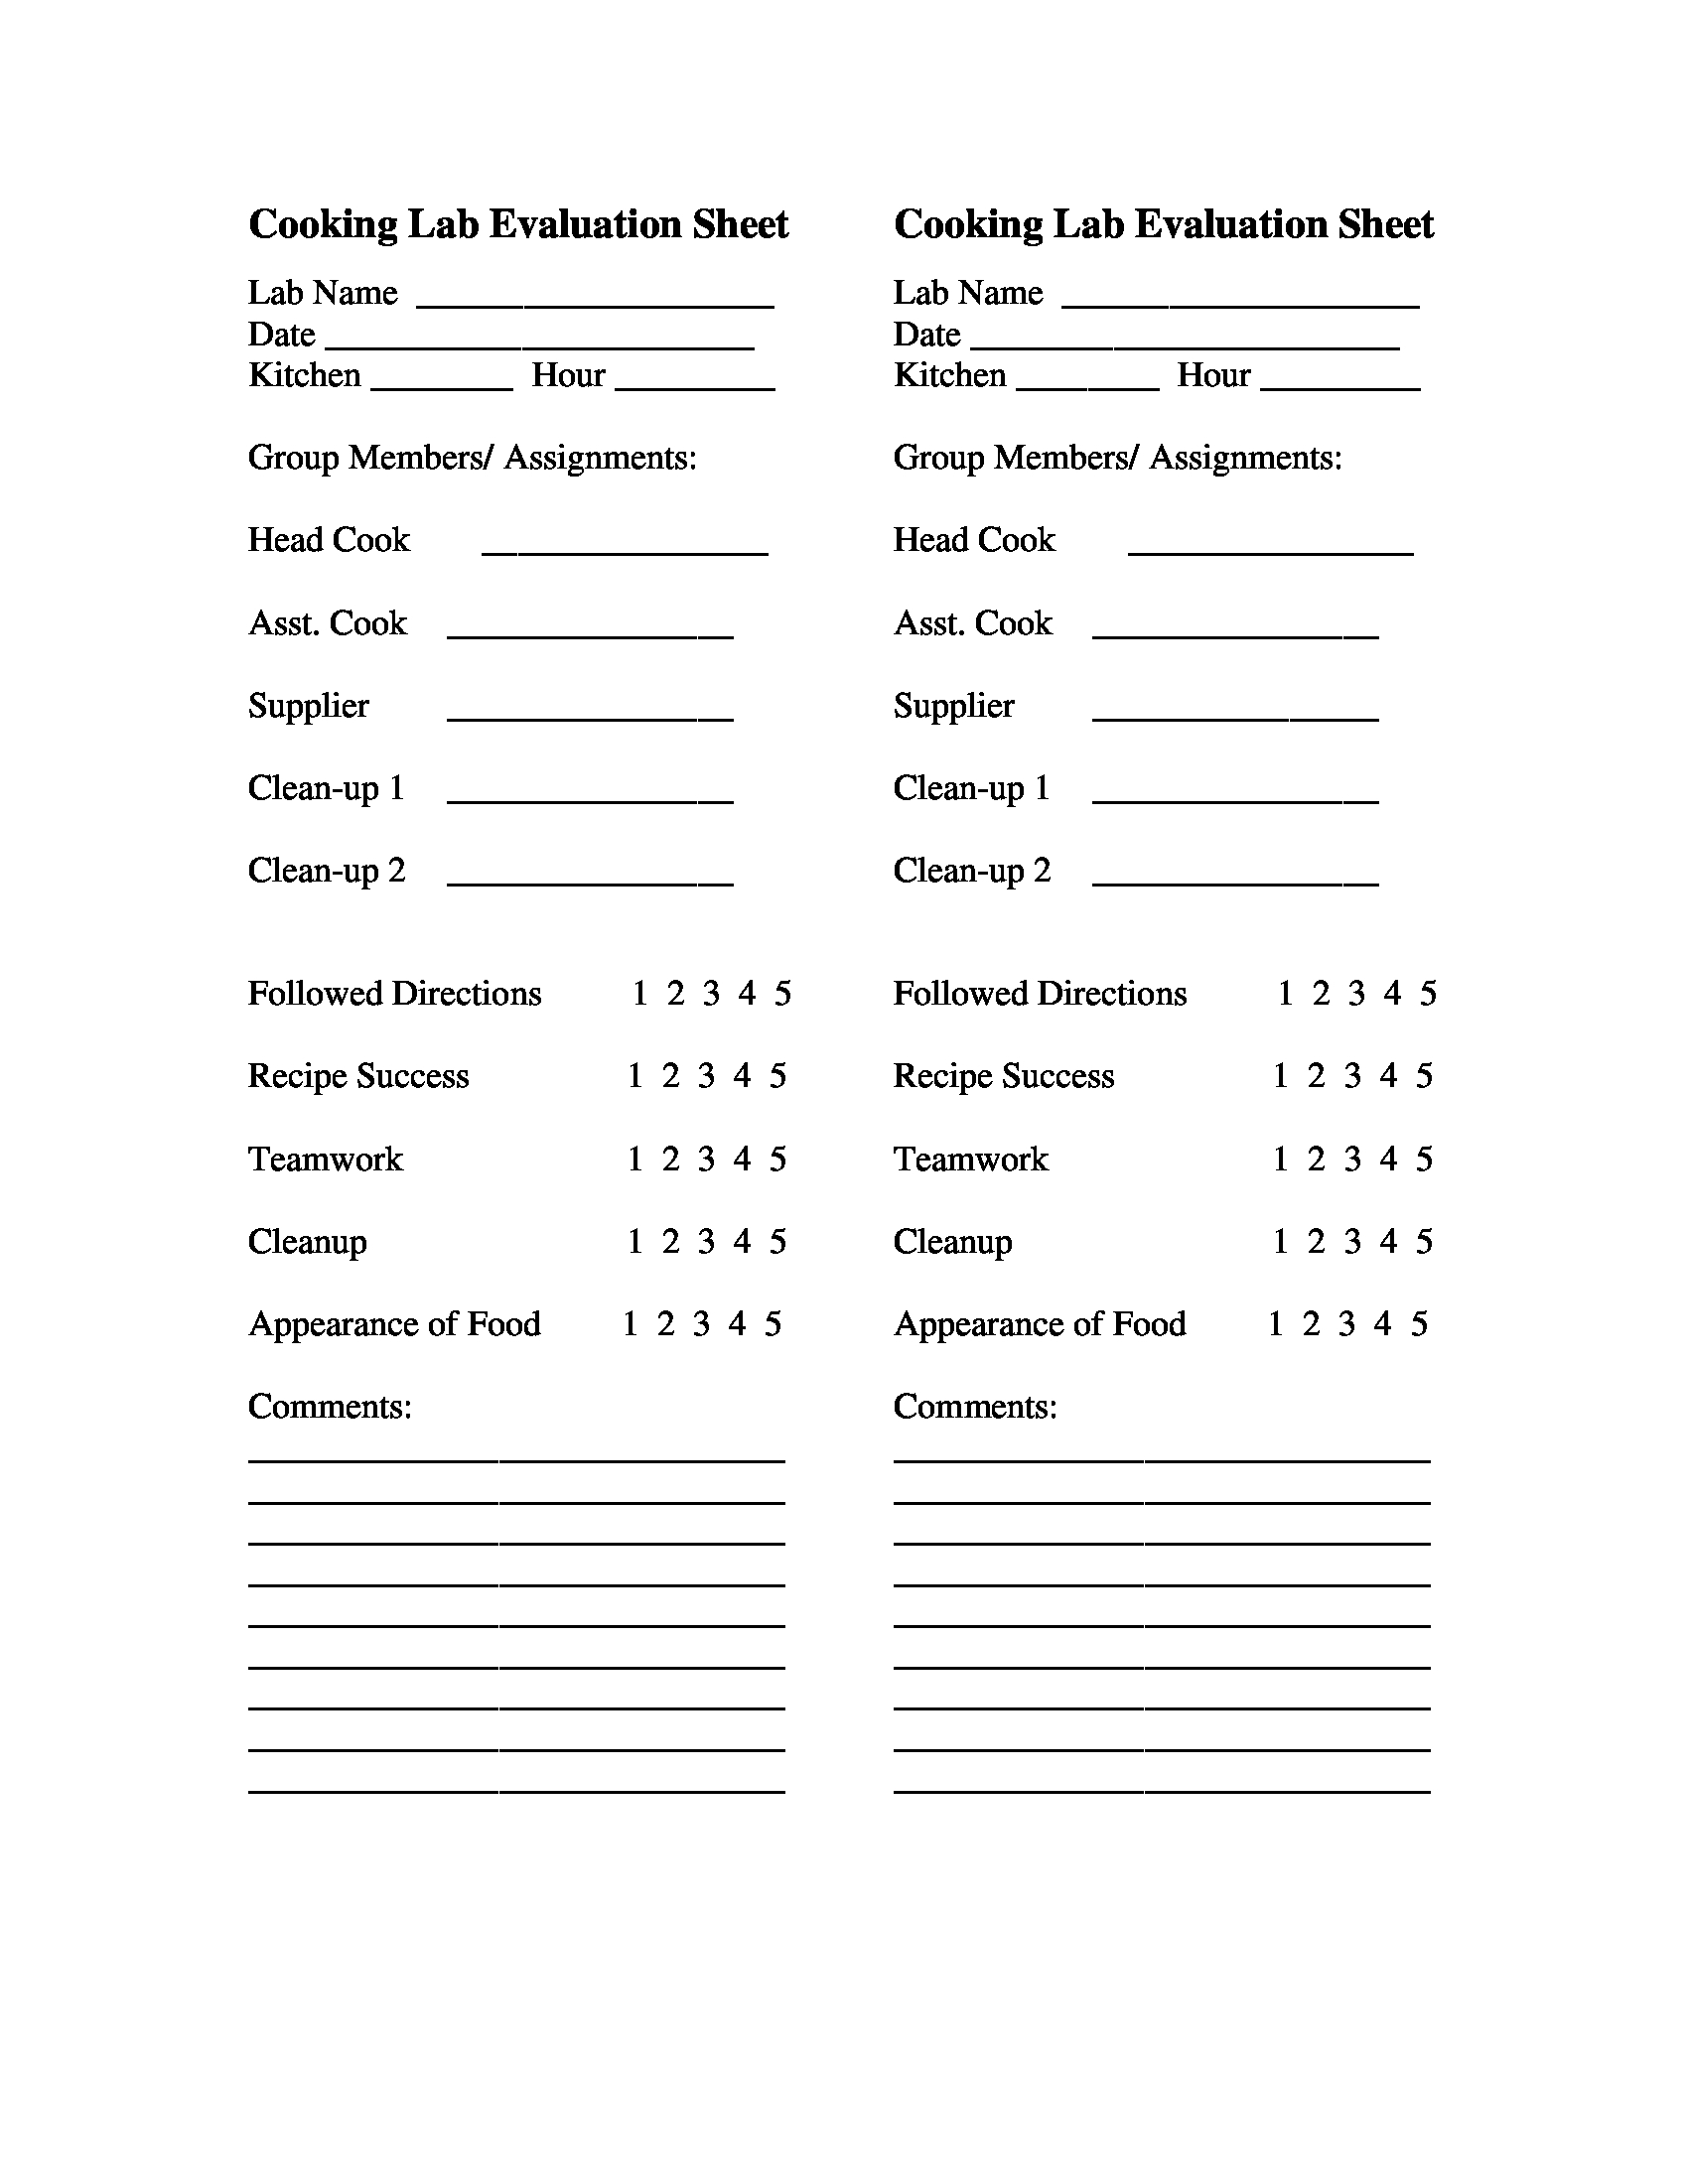 cooking lab evaluation sheet form 1